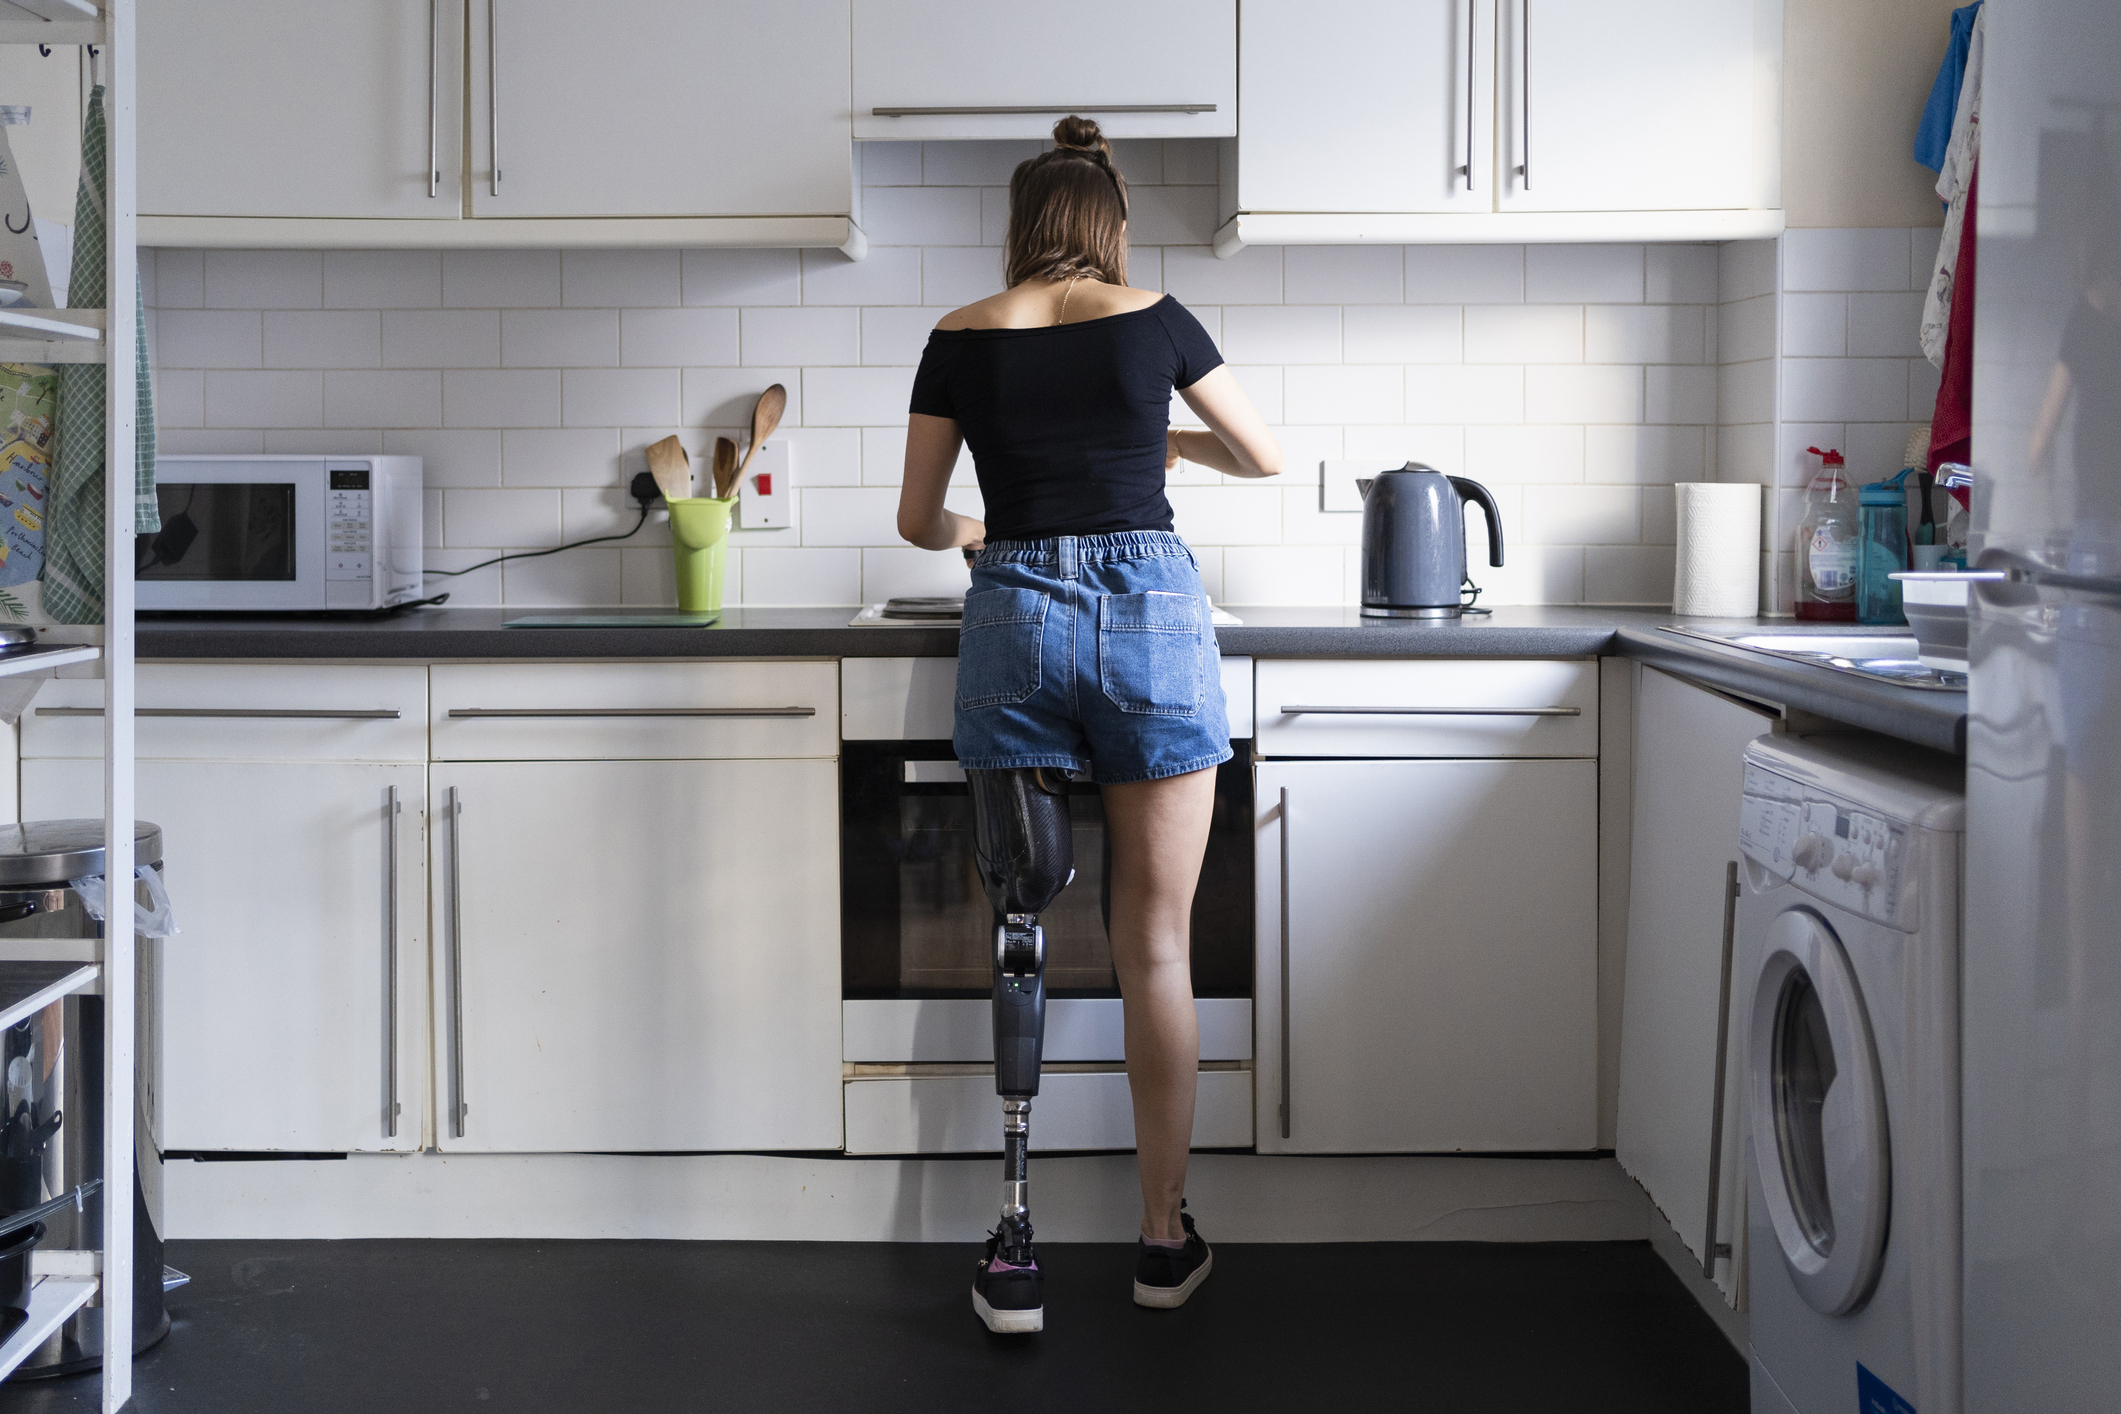 Disabled woman in kitchen